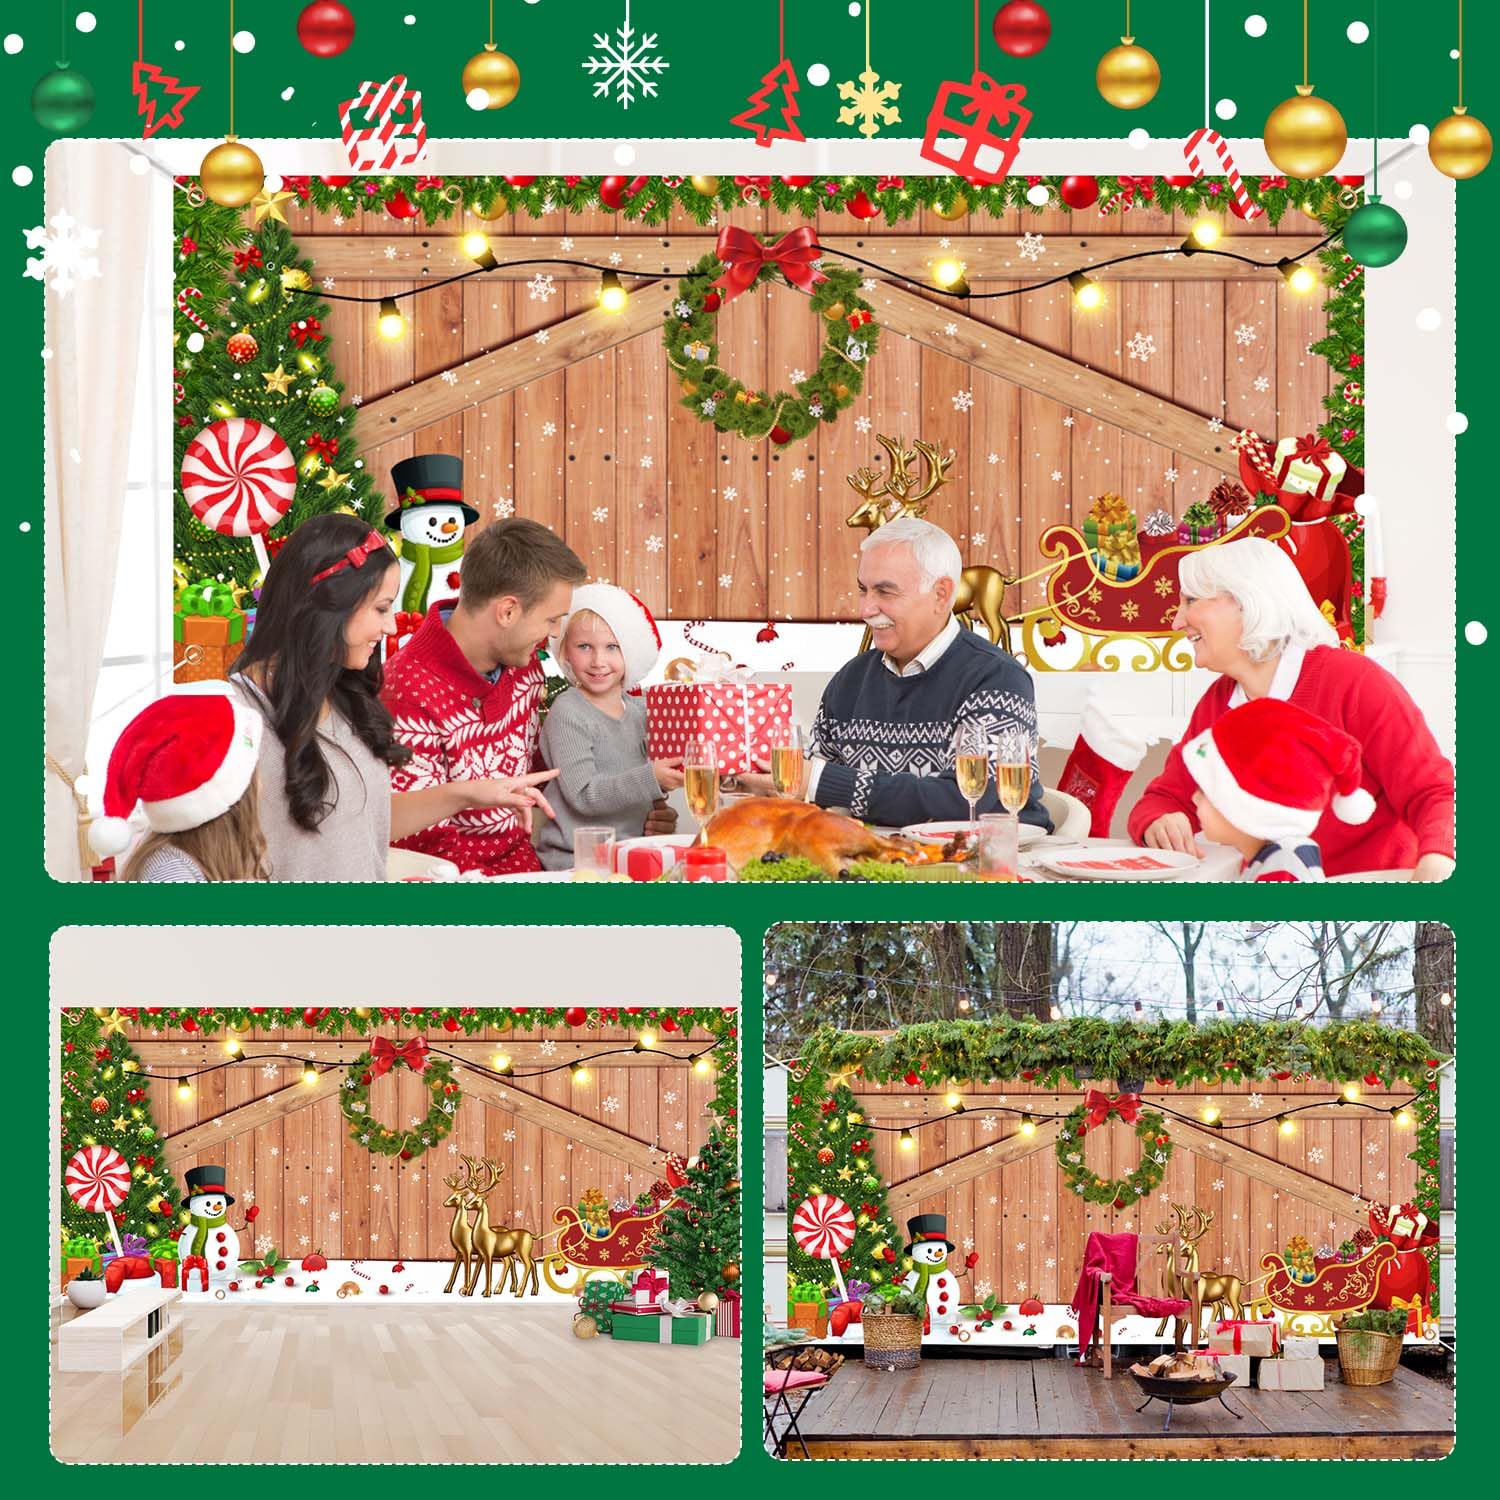 7 x 16 ft Christmas Garage Door Banner Decorations,Christmas Double Garage Door Cover,Hanging Banner Large Christmas Backdrop Decoration for Outdoor Indoor Home Holiday Party Photo Wall Background